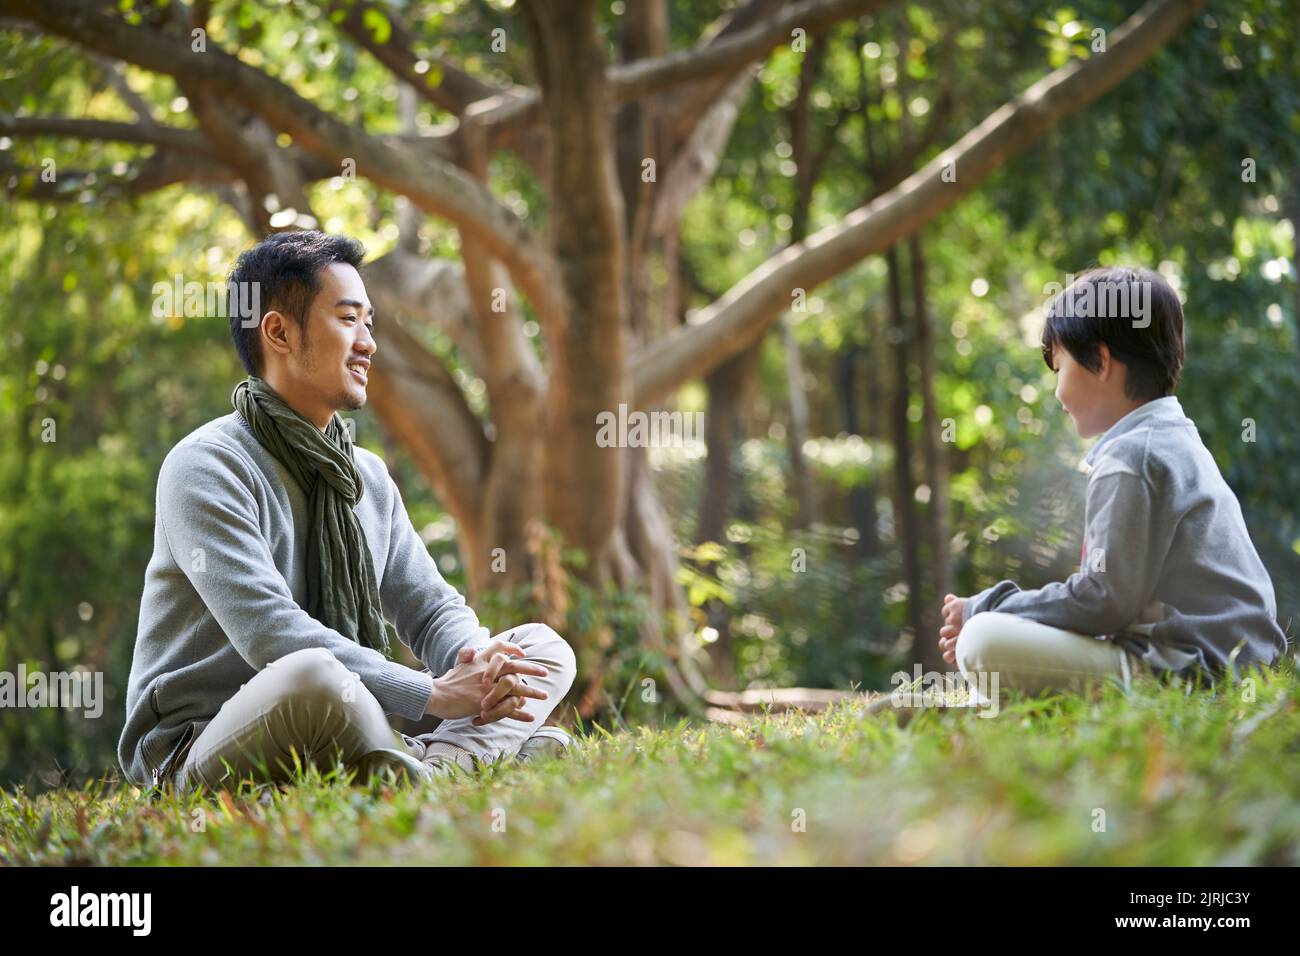 asian father and son sitting on grass having a pleasant conversation outdoors in park Stock Photo